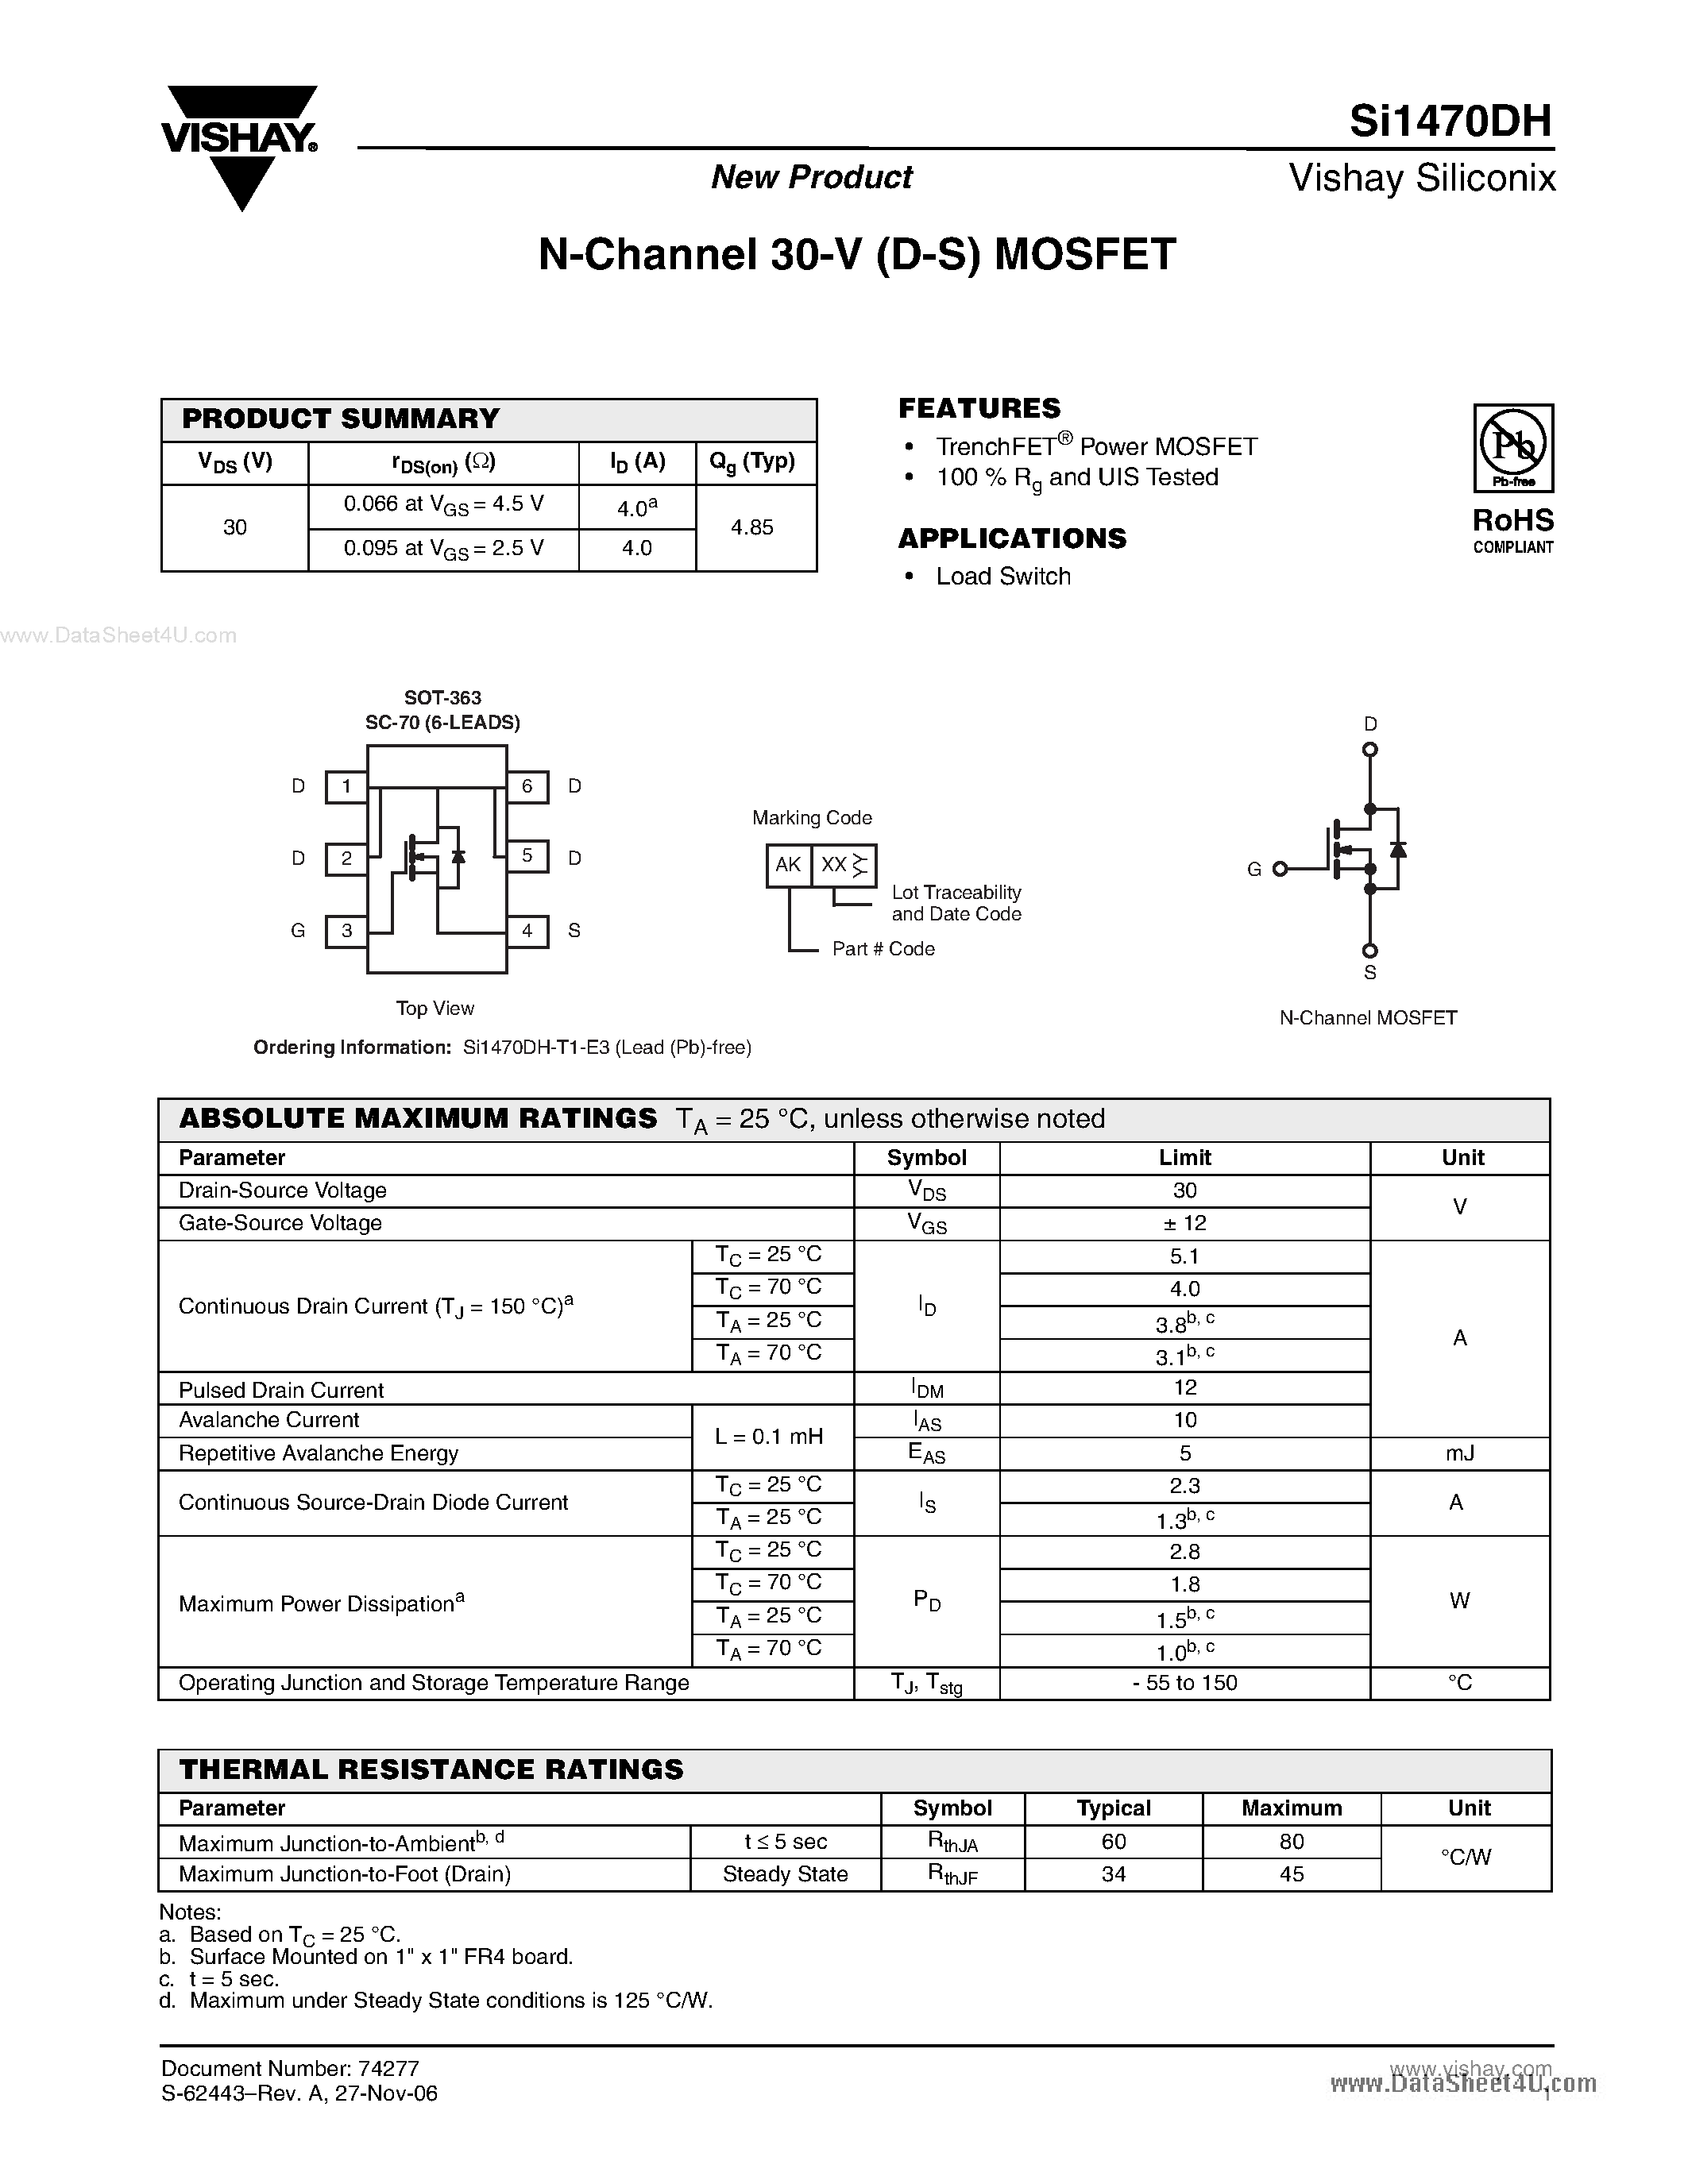 Даташит SI1470DH - N-Channel MOSFET страница 1